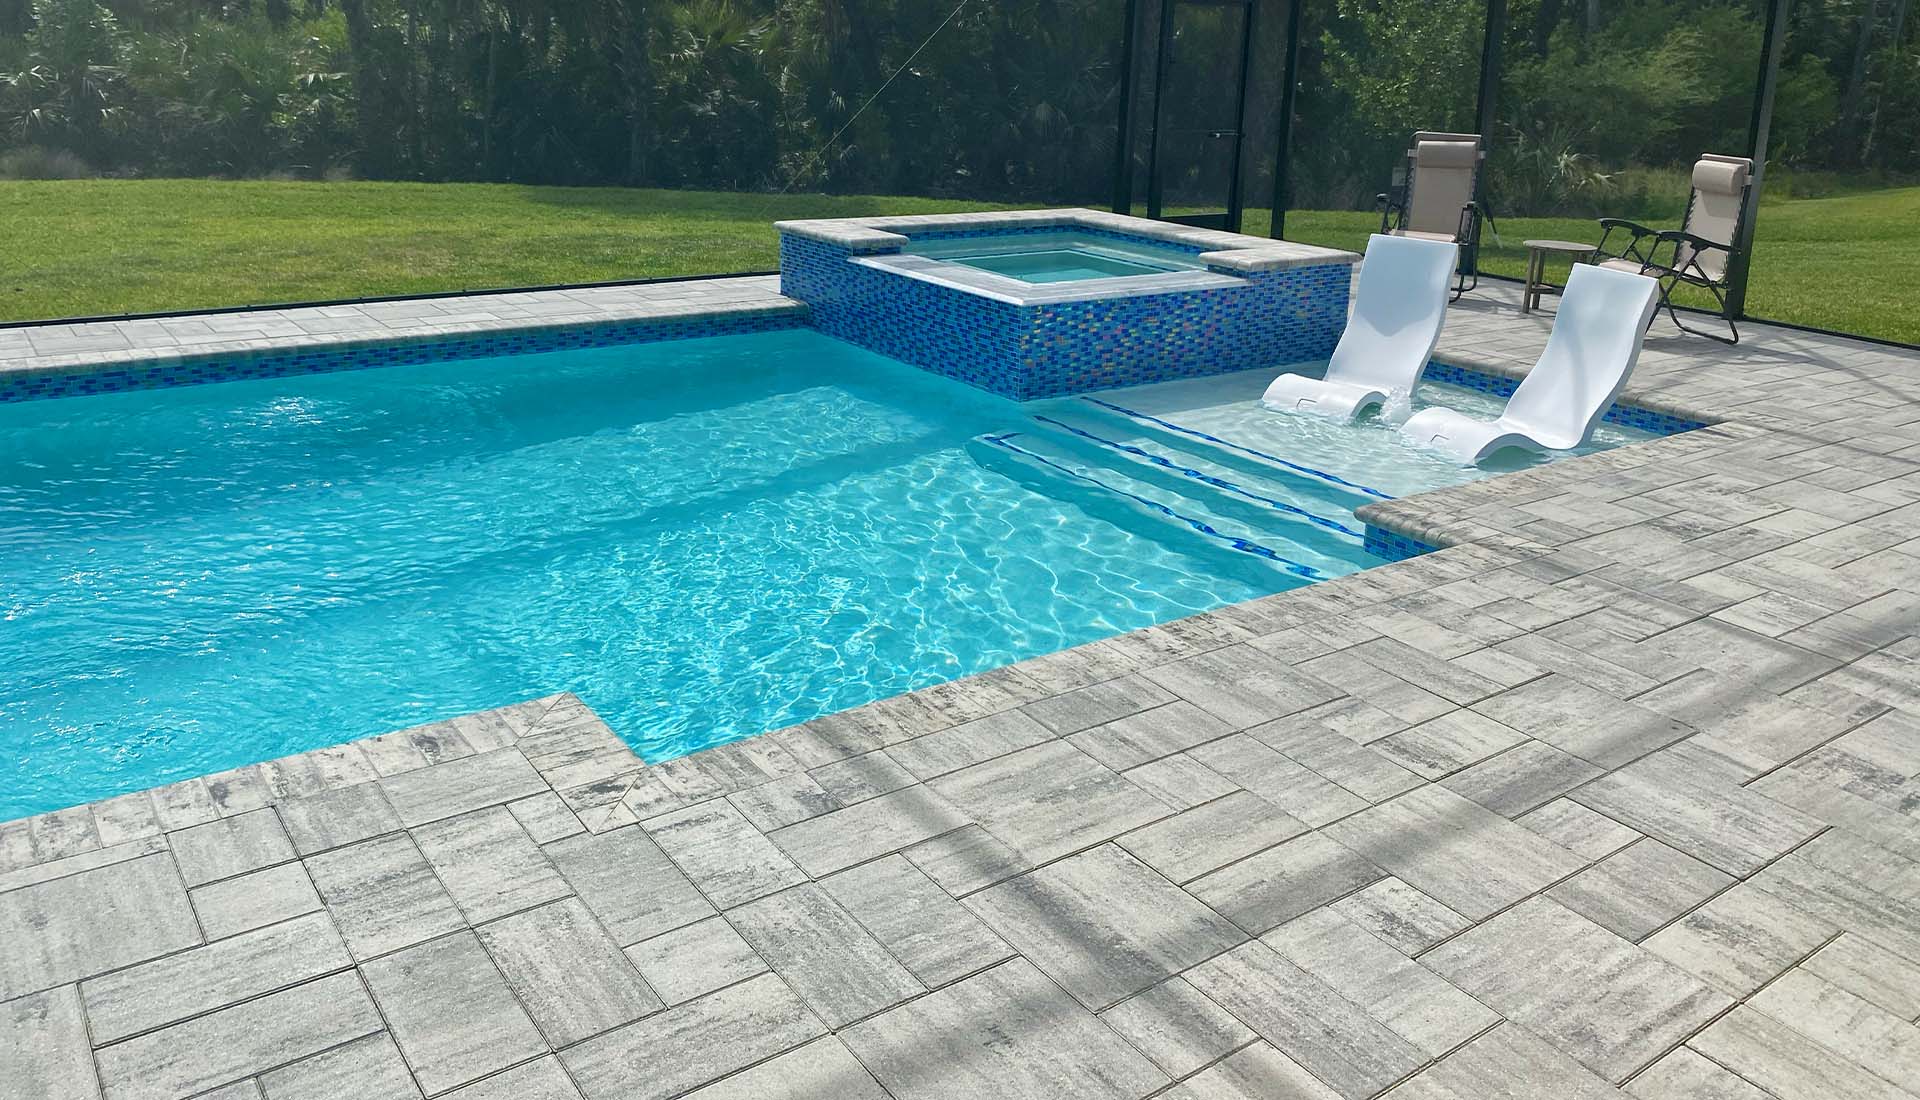 6 - Photo of Cement Pavers and glass tile spa - Pool and Deck Concepts, Naples, FL